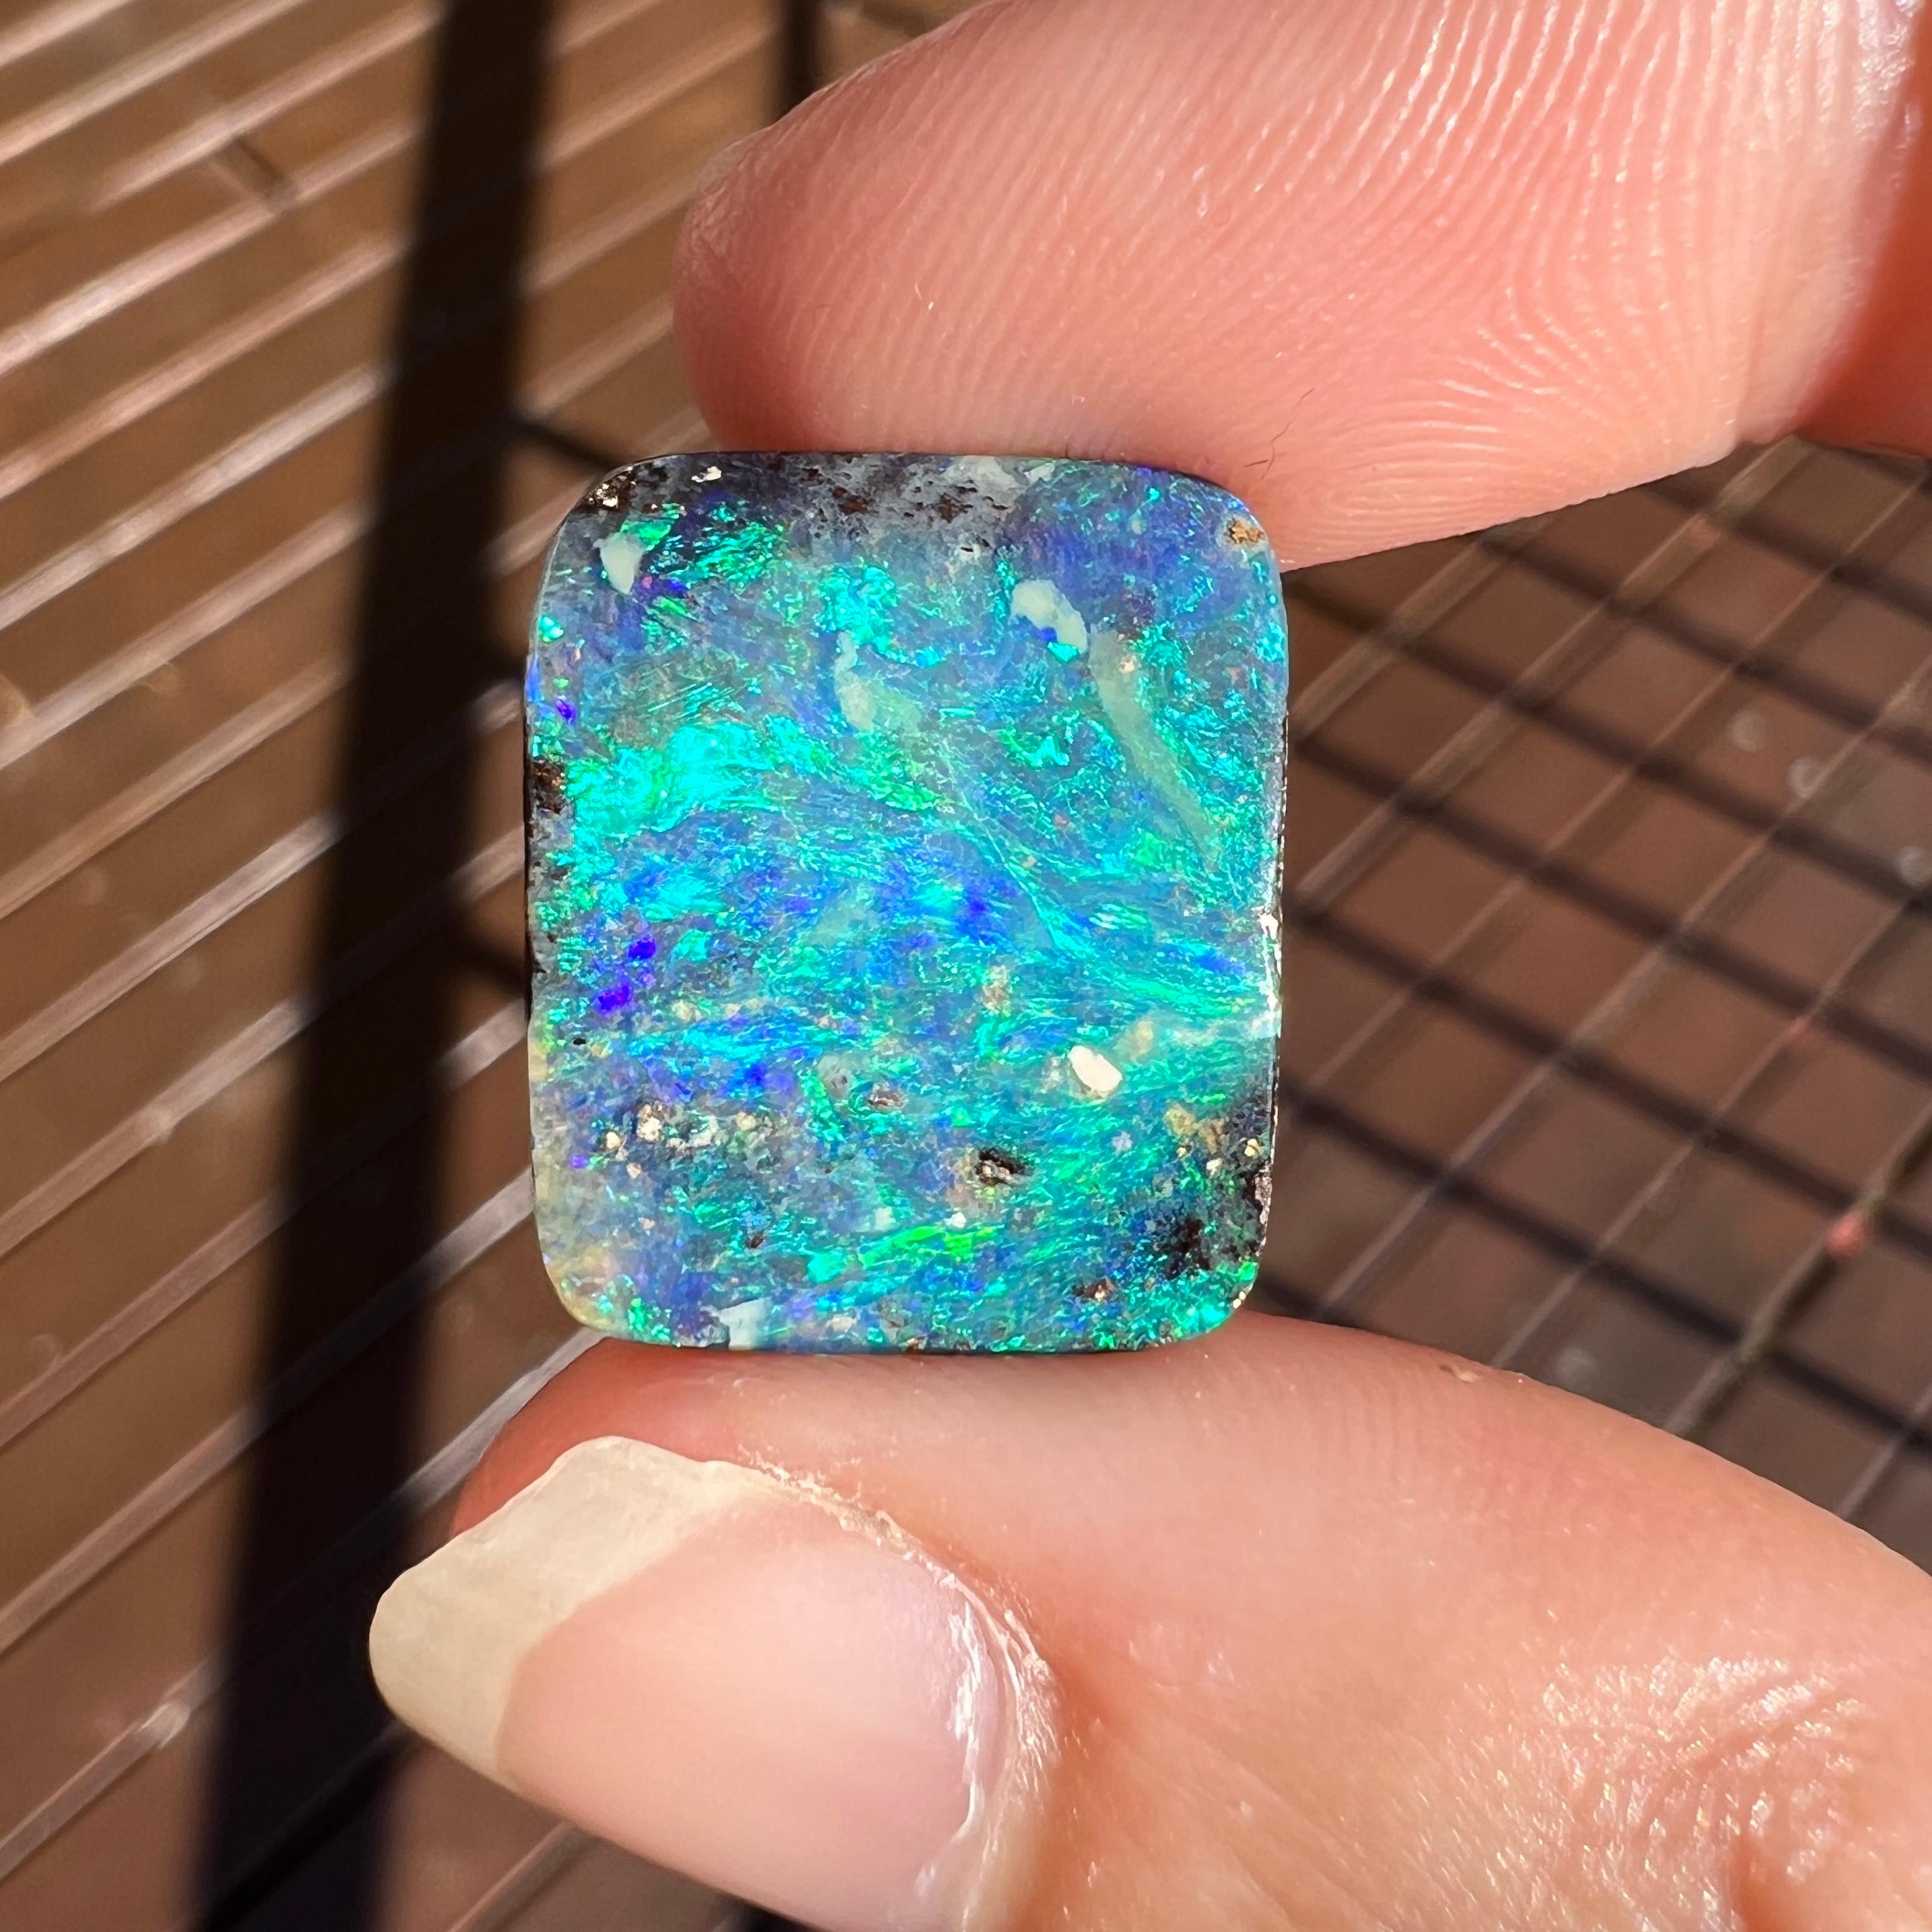 This rare 12.61 Ct Australian black boulder opal was mined by Sue Cooper at her Yaraka opal mine in western Queensland, Australia in 2021. Sue processed the rough opal herself and cut into into a classic rectangle shape. We love how bright the green